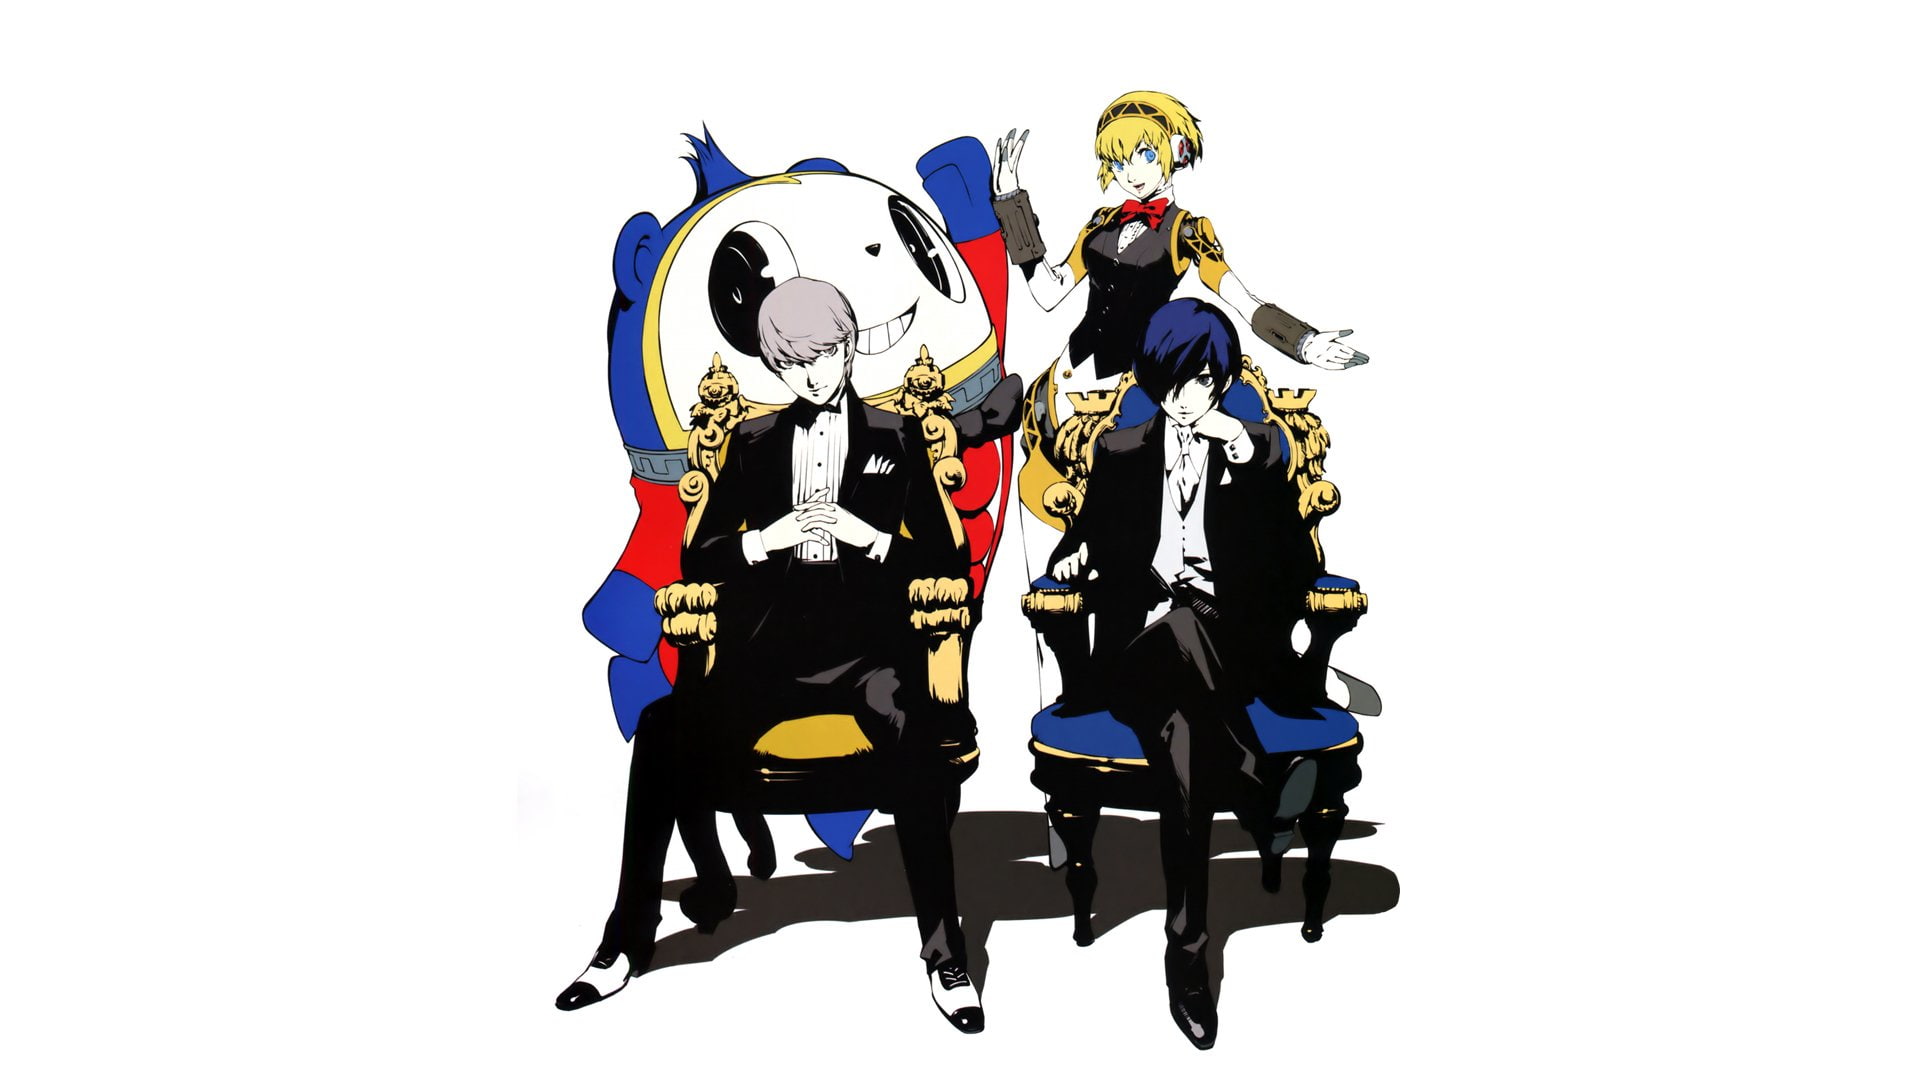 Persona 4 Persona Series Protagonist Kuma Persona 4 Video Games Video Game Characters Simple Backgro 1920x1080